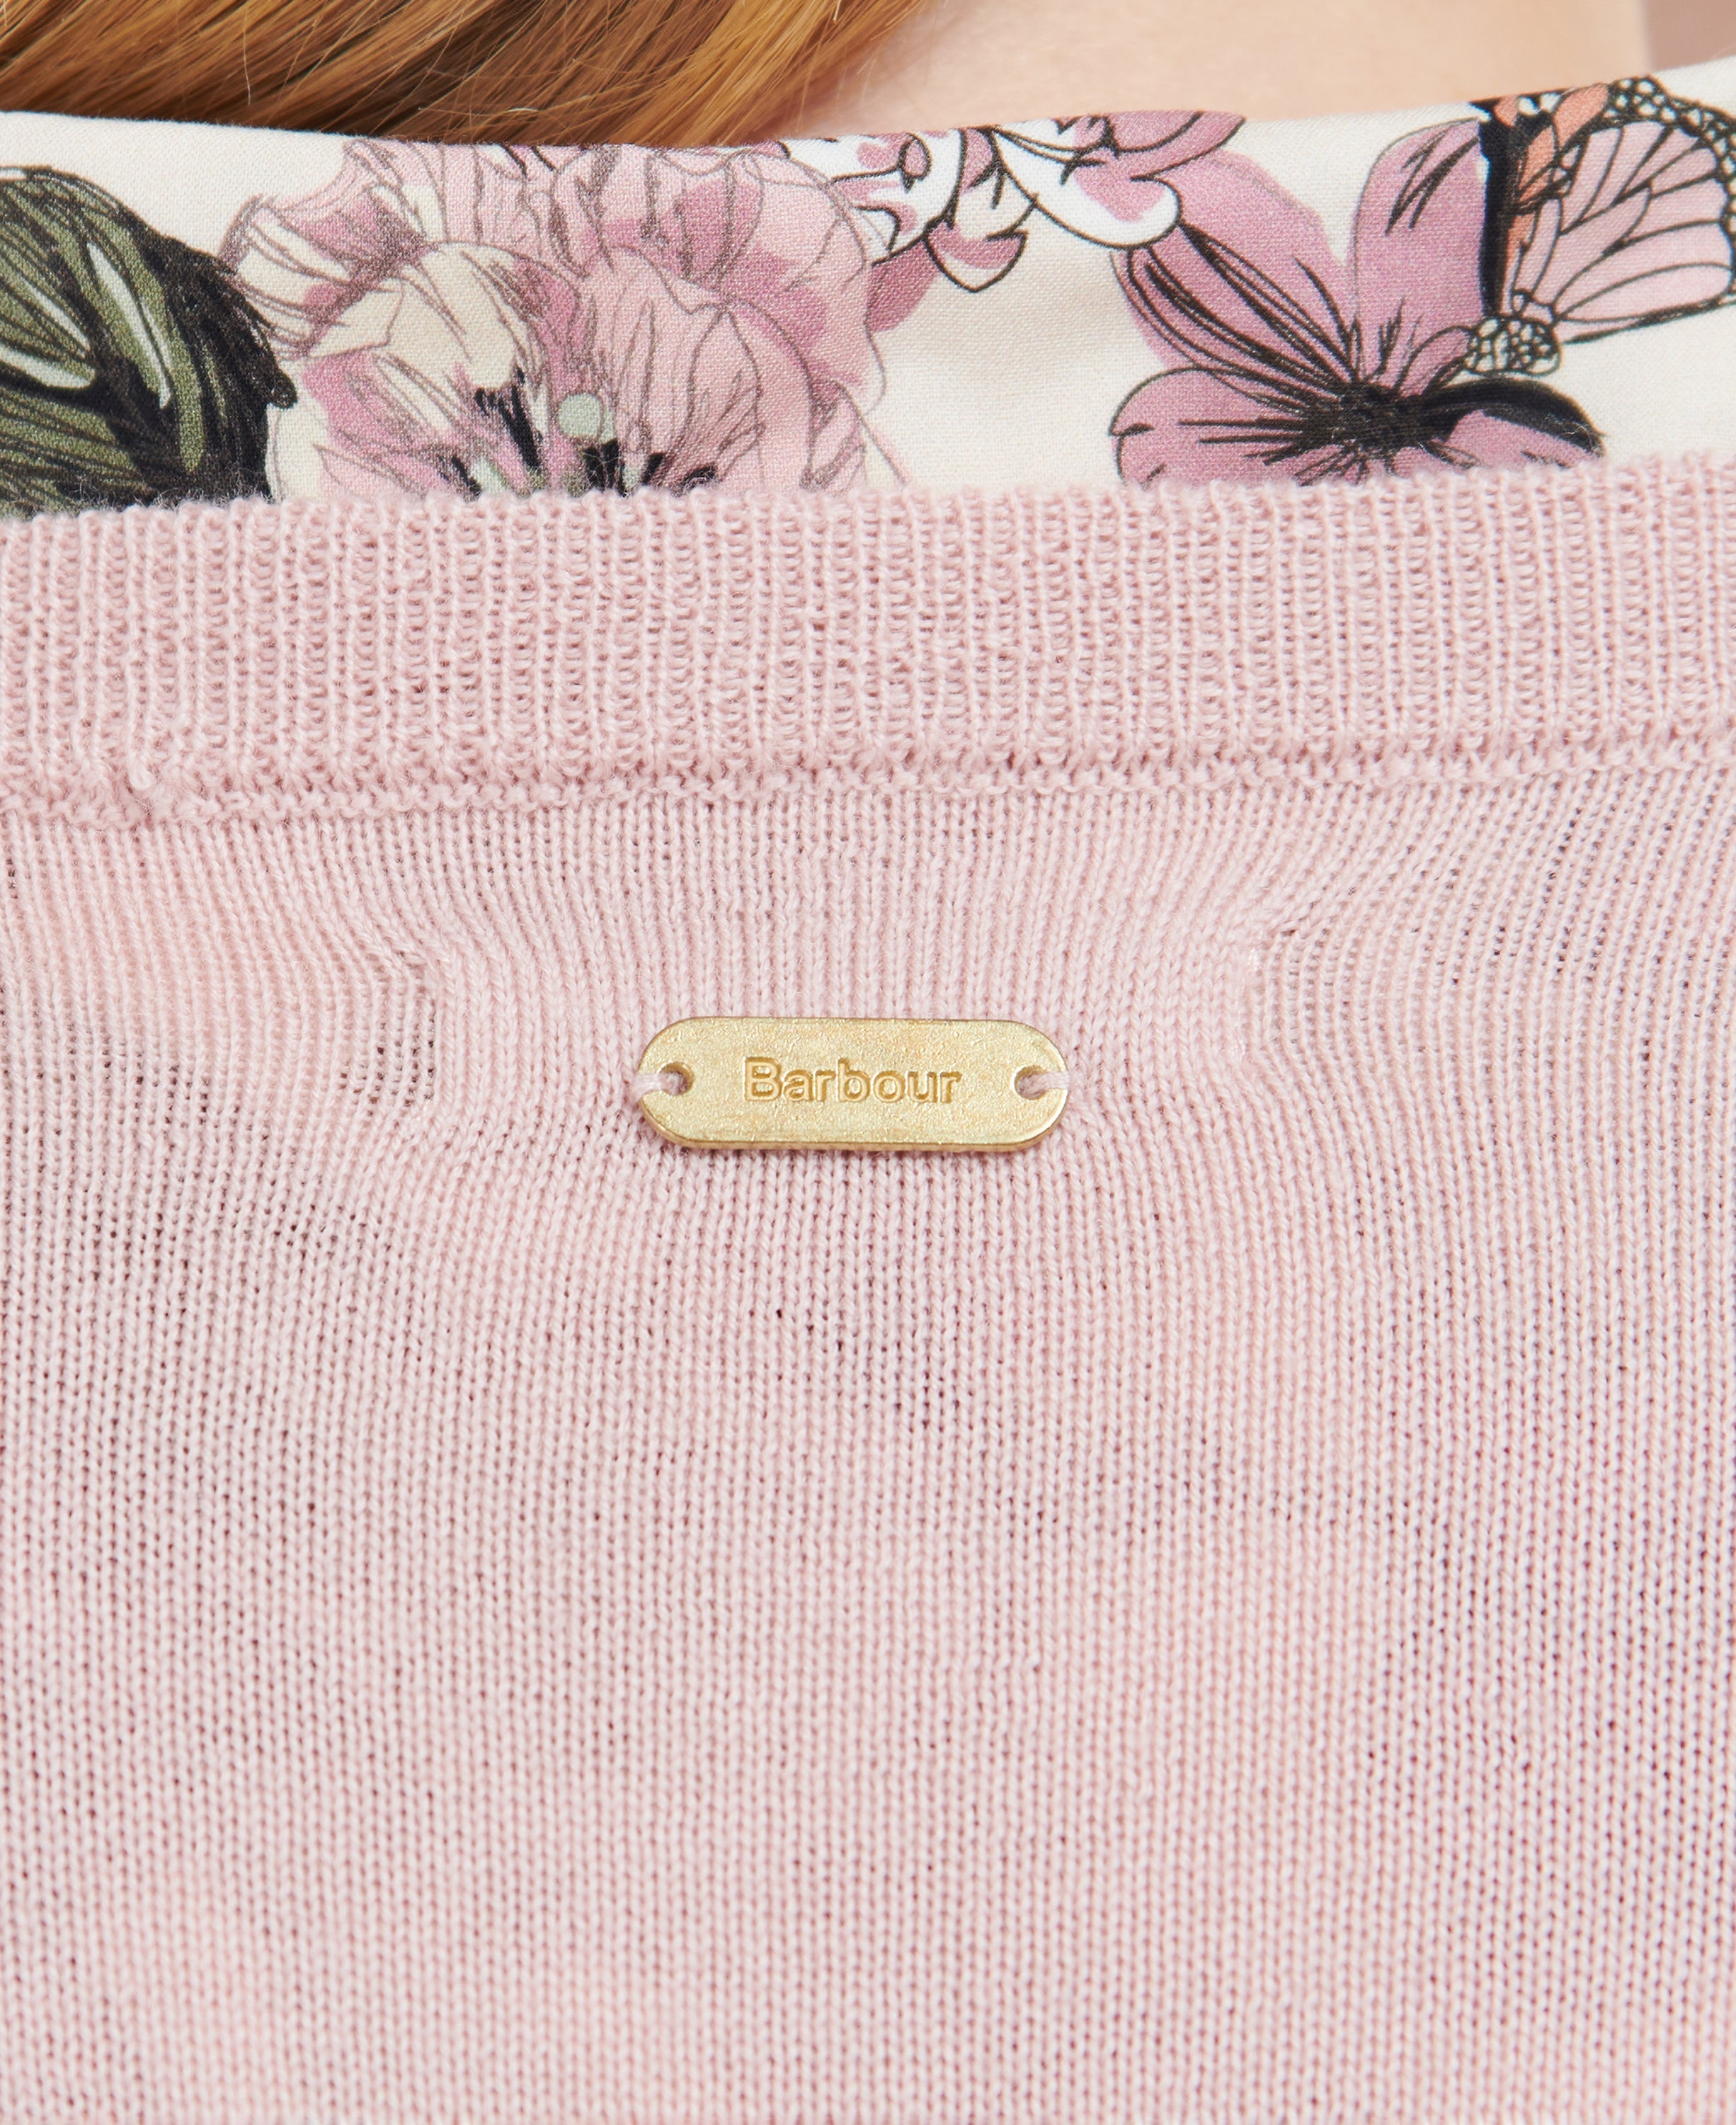 Barbour Ridley Knit - Rosewater